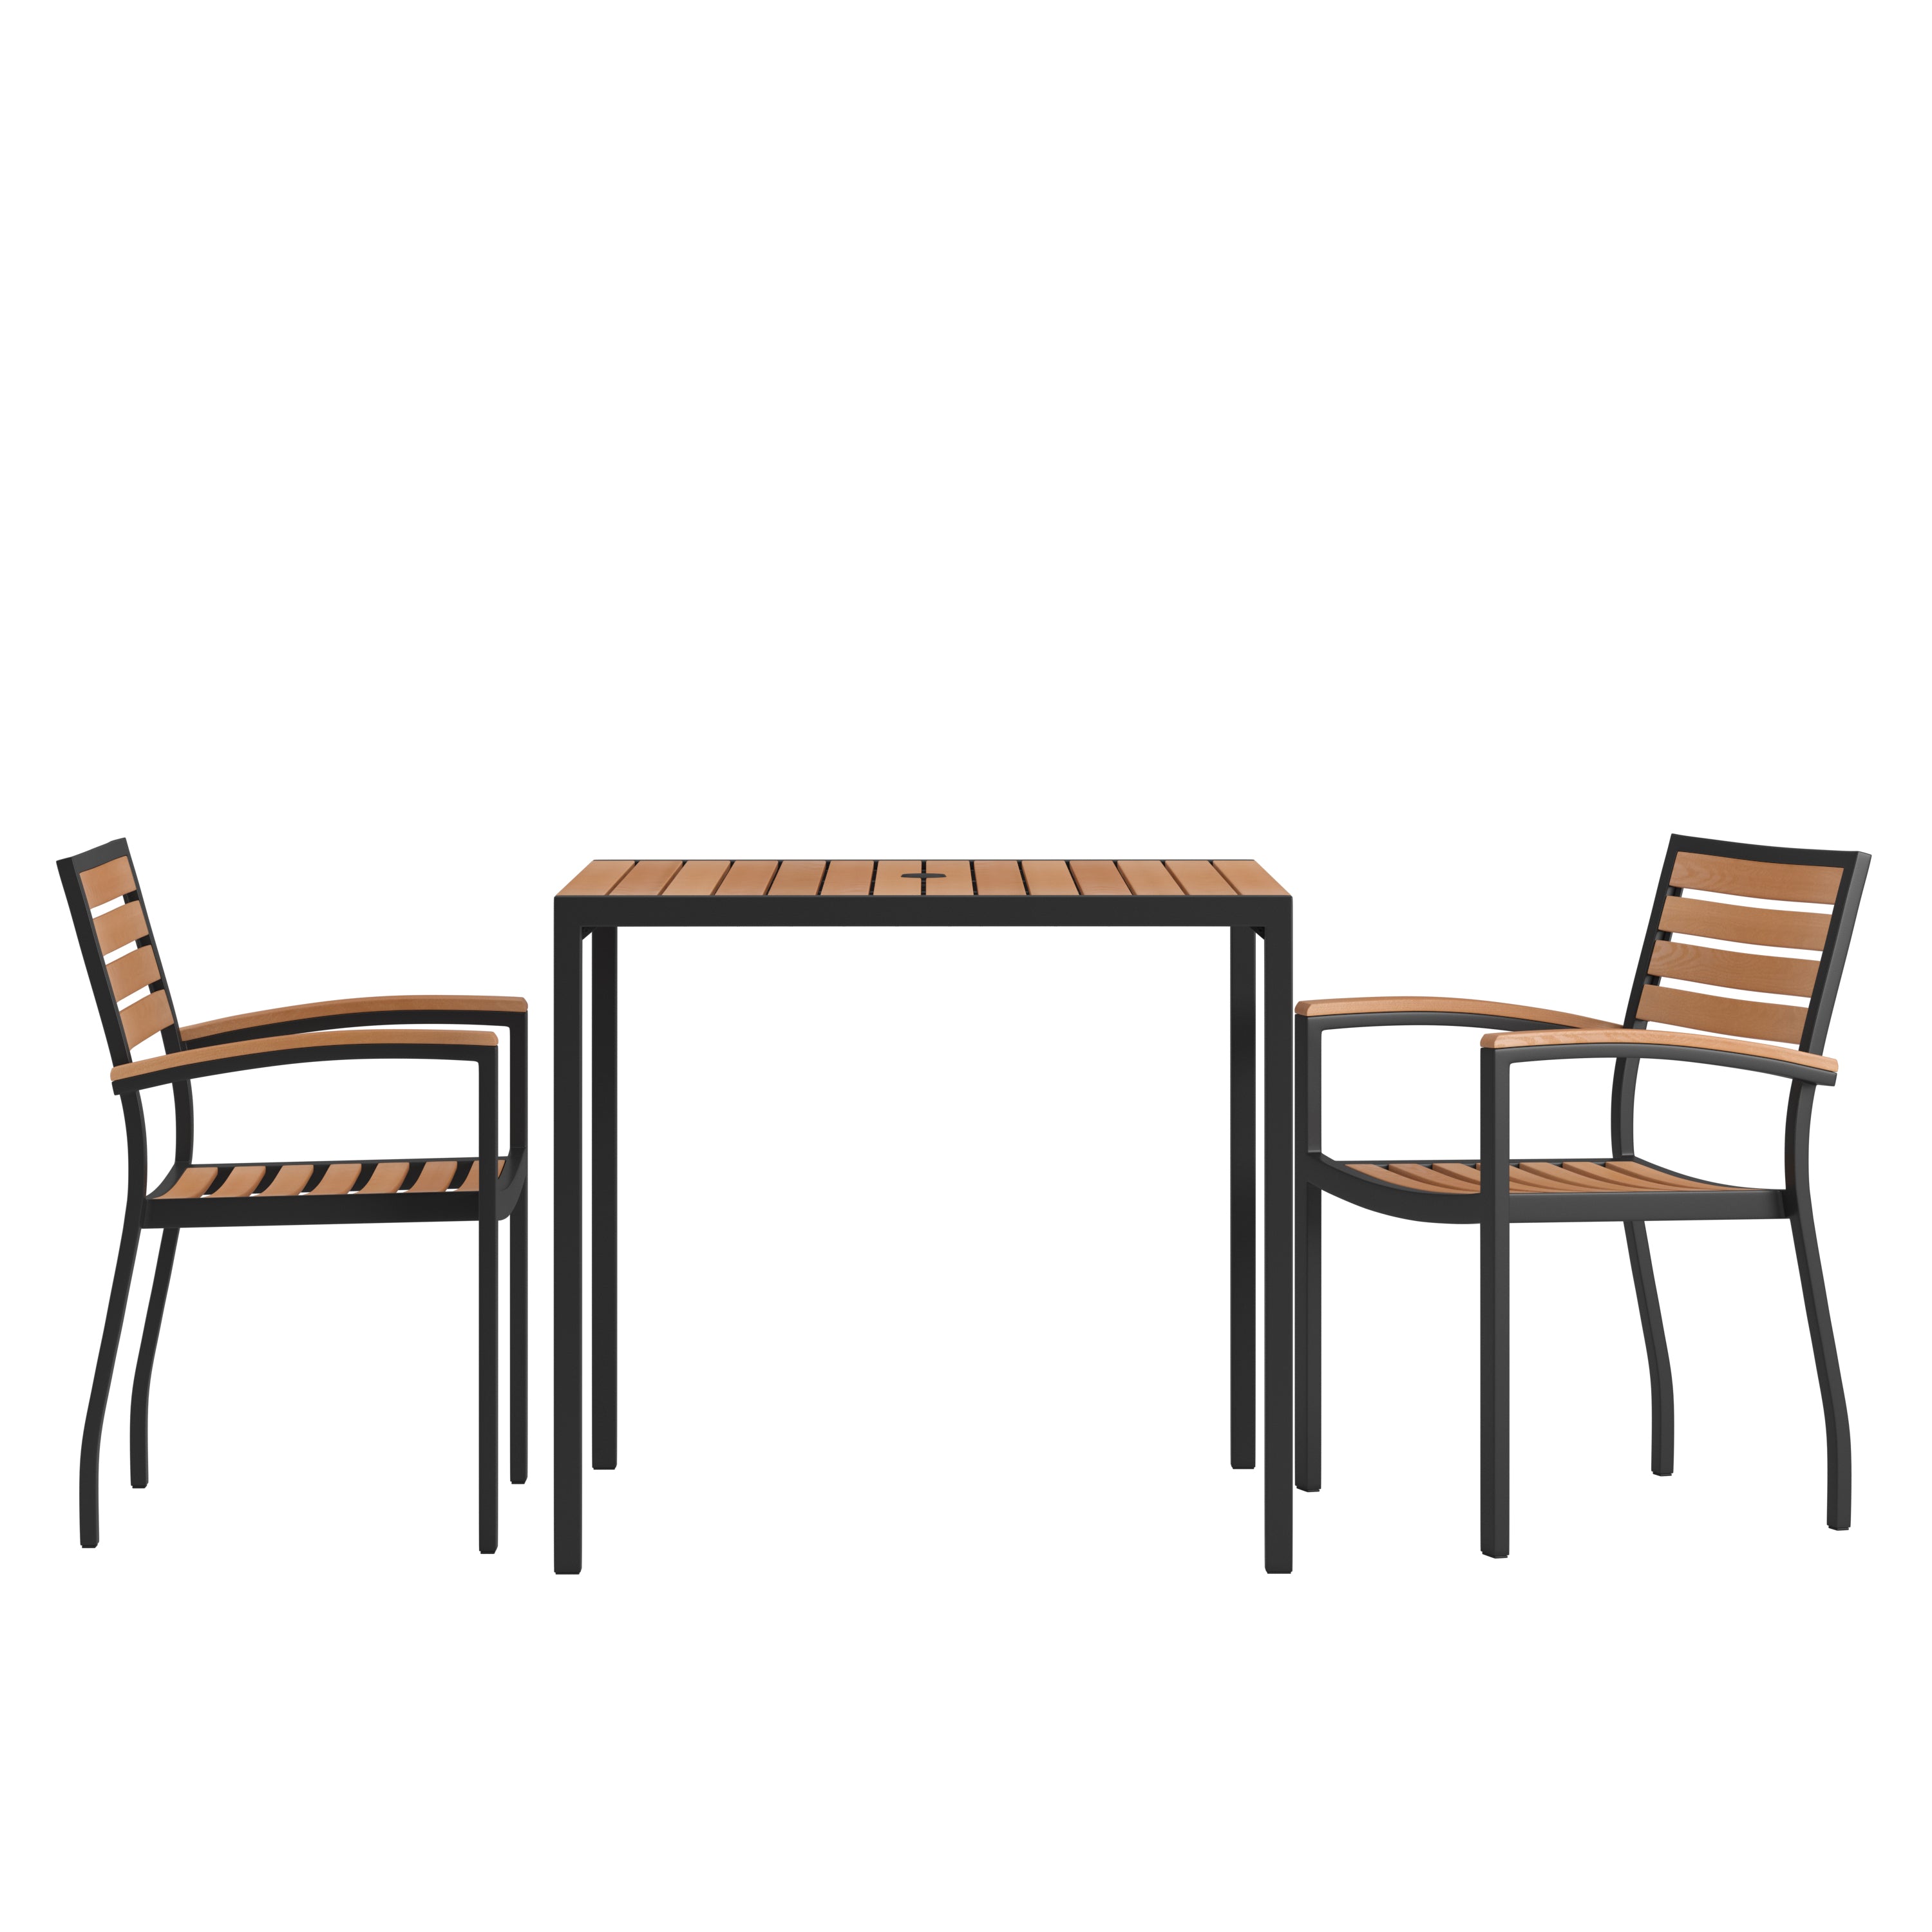 Lark 3 Piece Outdoor Dining Table Set - Synthetic Teak Poly Slats - Lark 3Lark 5" Square Steel Framed Table with Umbrella Hole - 2 Club Chairs-Patio Table and Chair Set-Flash Furniture-Wall2Wall Furnishings